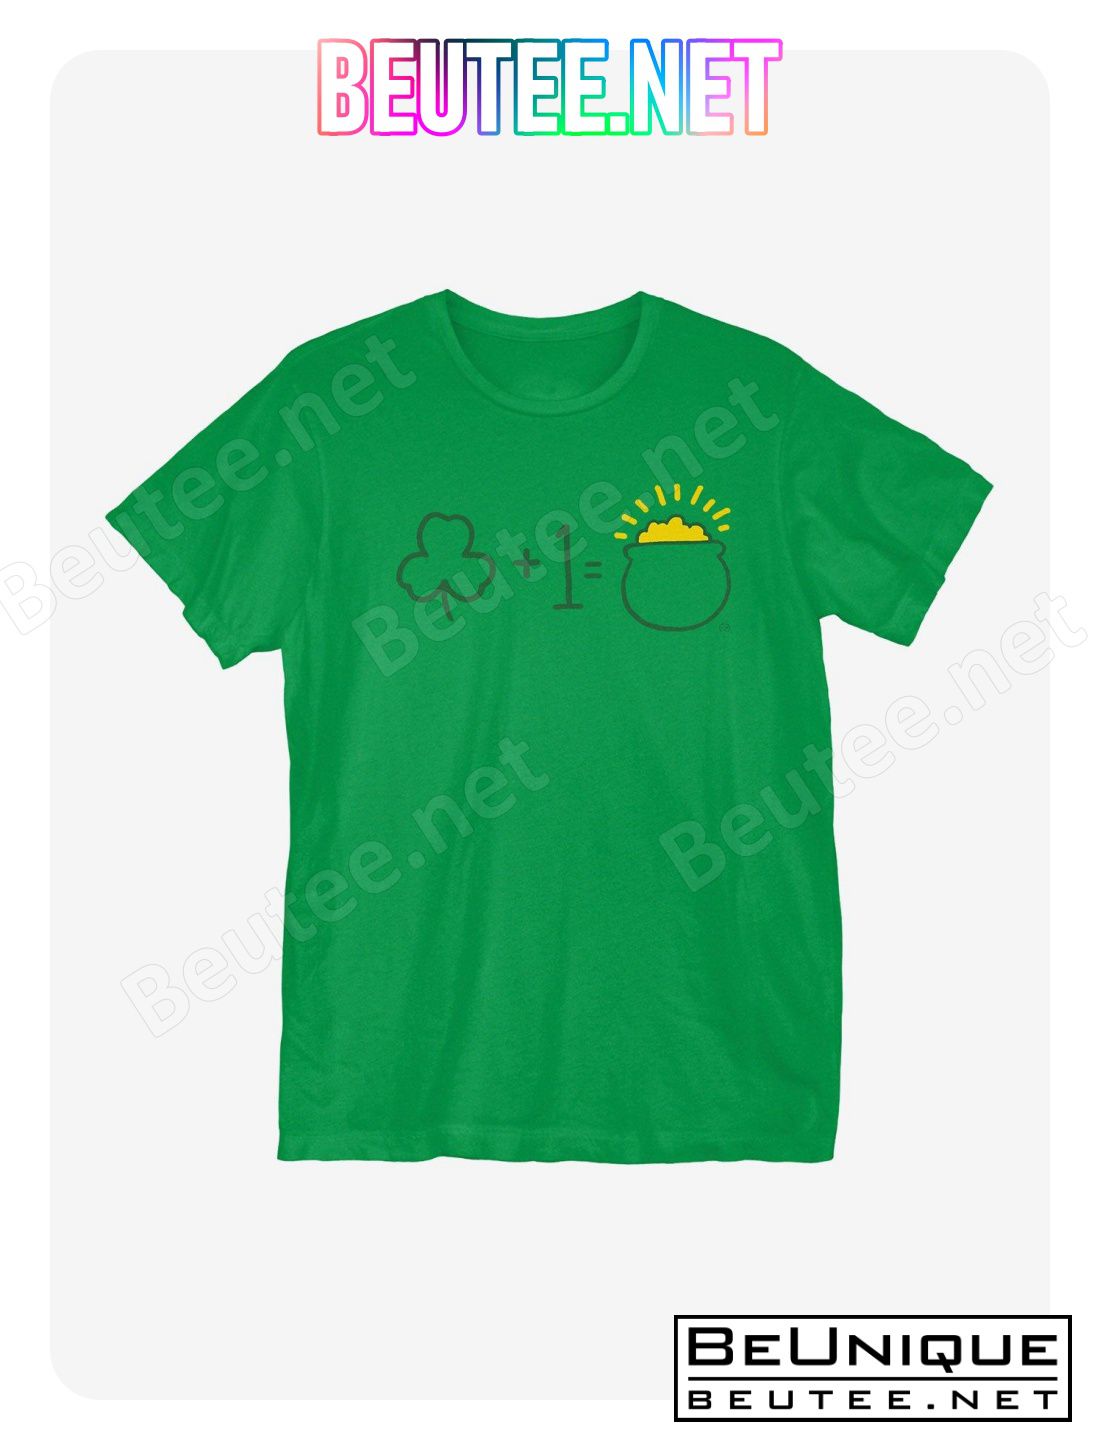 St Patrick's Day Get Rich T-Shirt